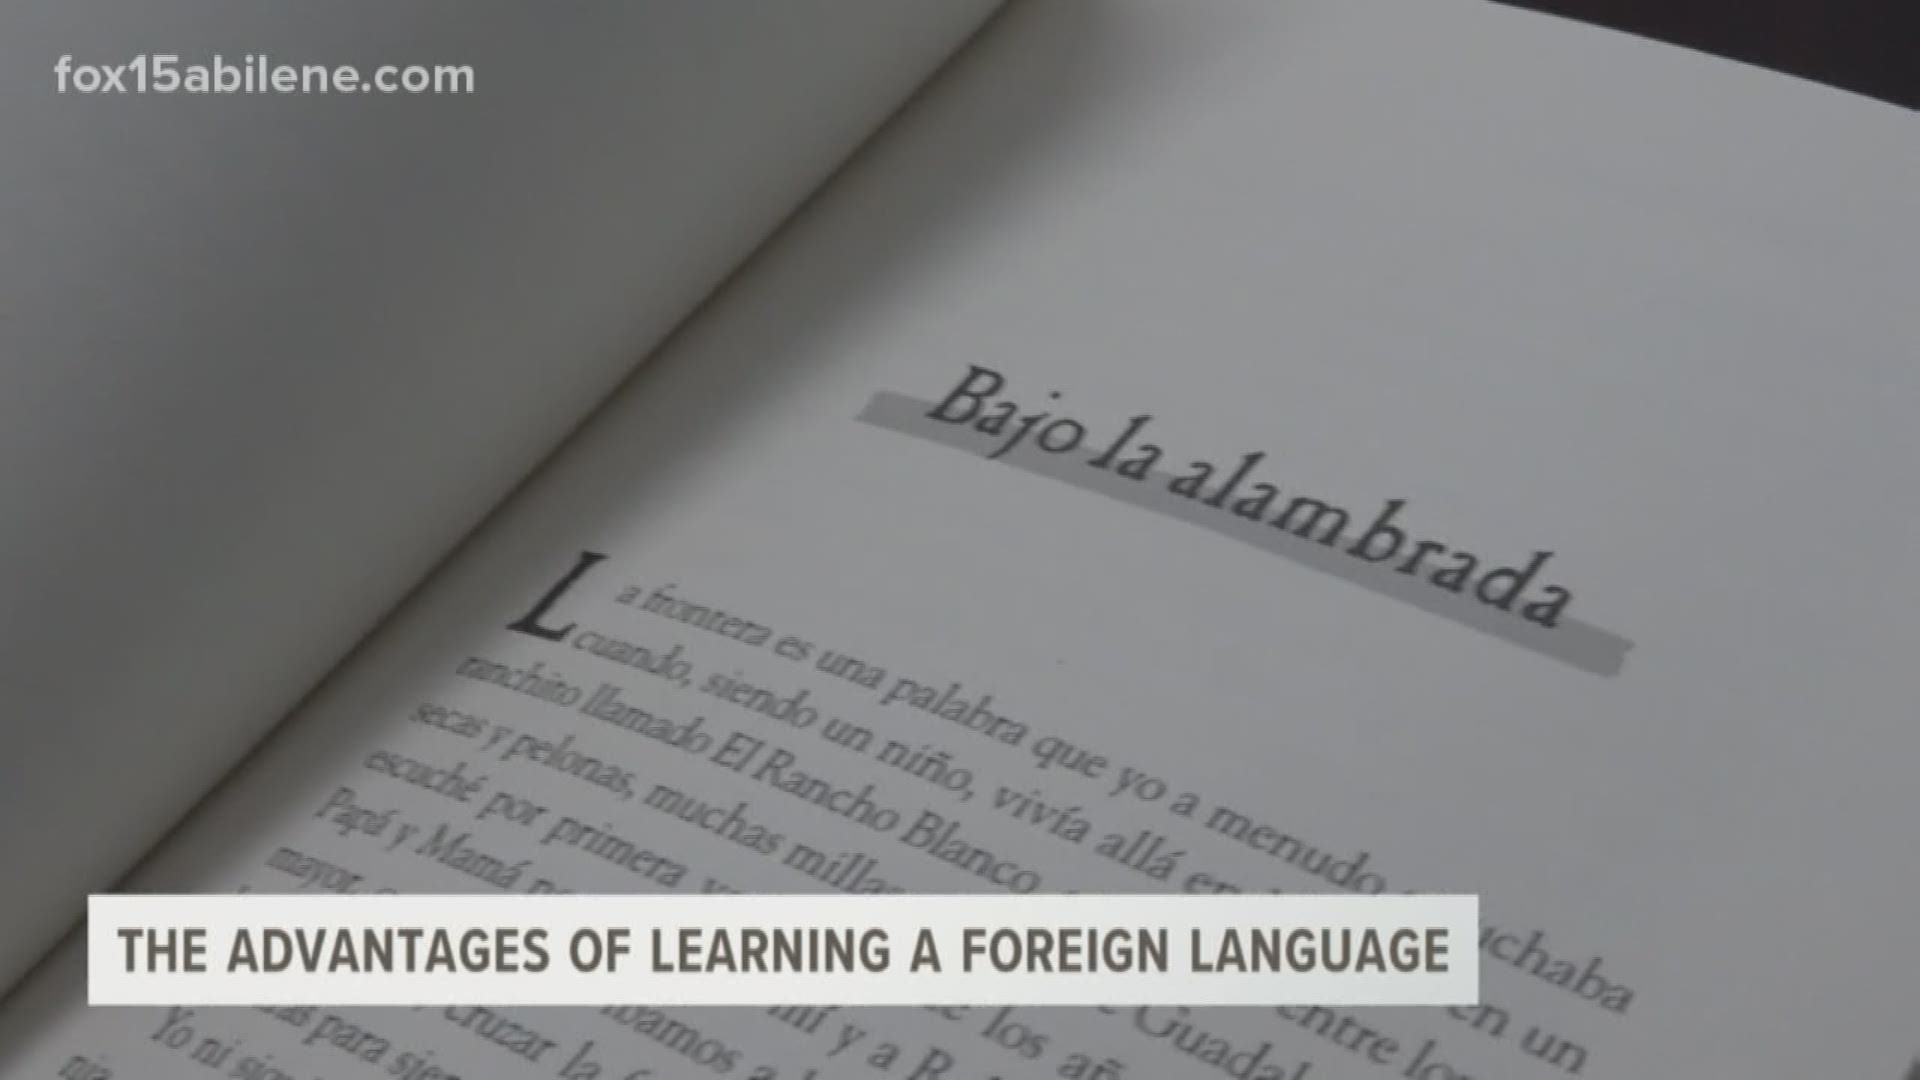 The advantages of being bilingual